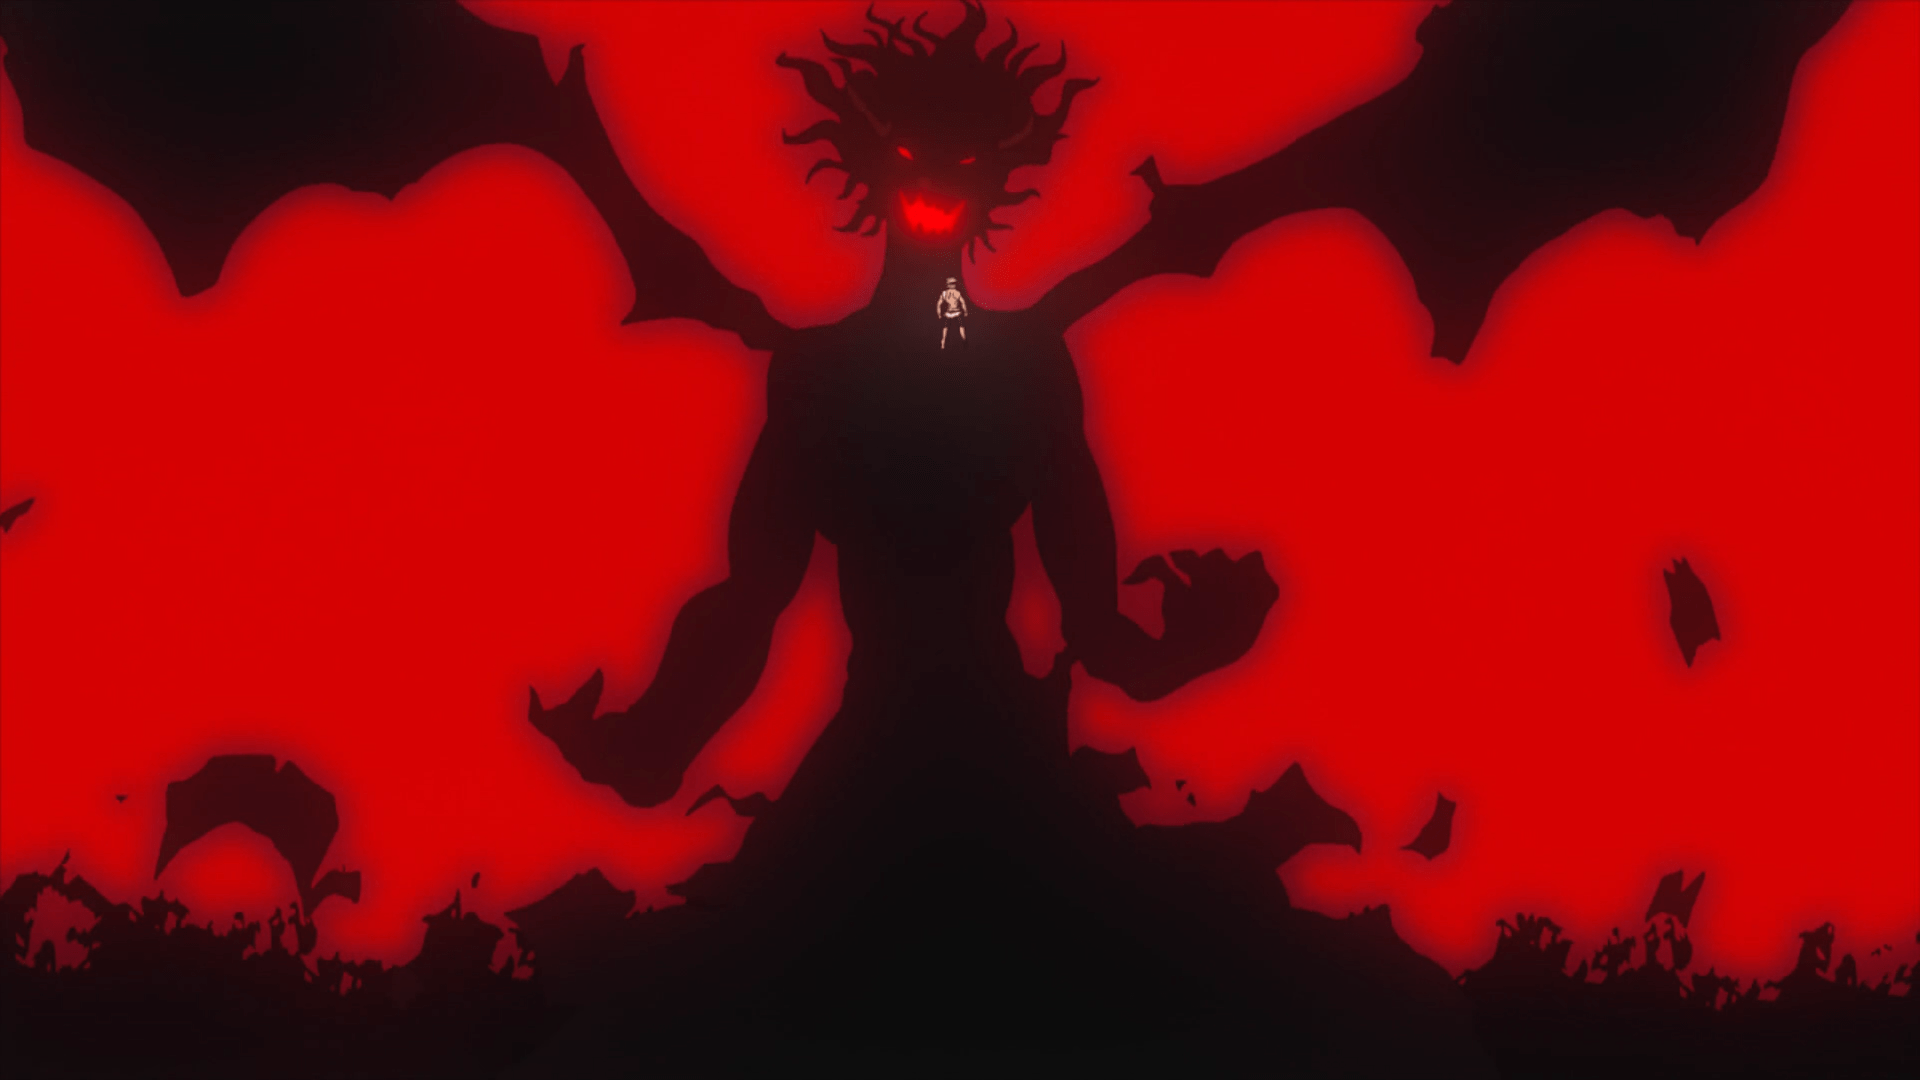 black-clover-devil-wallpapers-ntbeamng